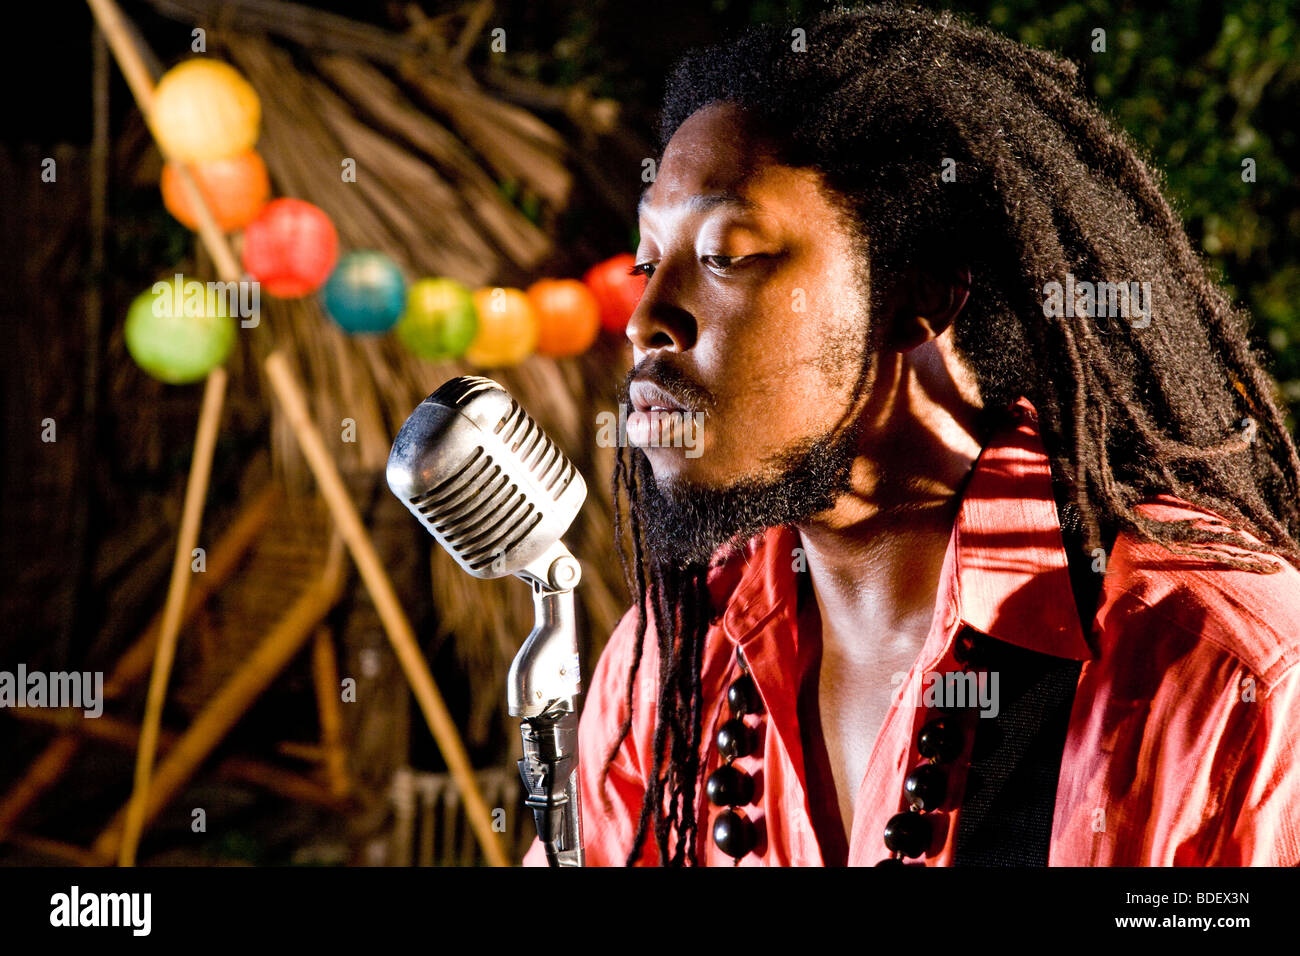 Young Jamaican man with dreadlocks singing on tropical island Stock Photo